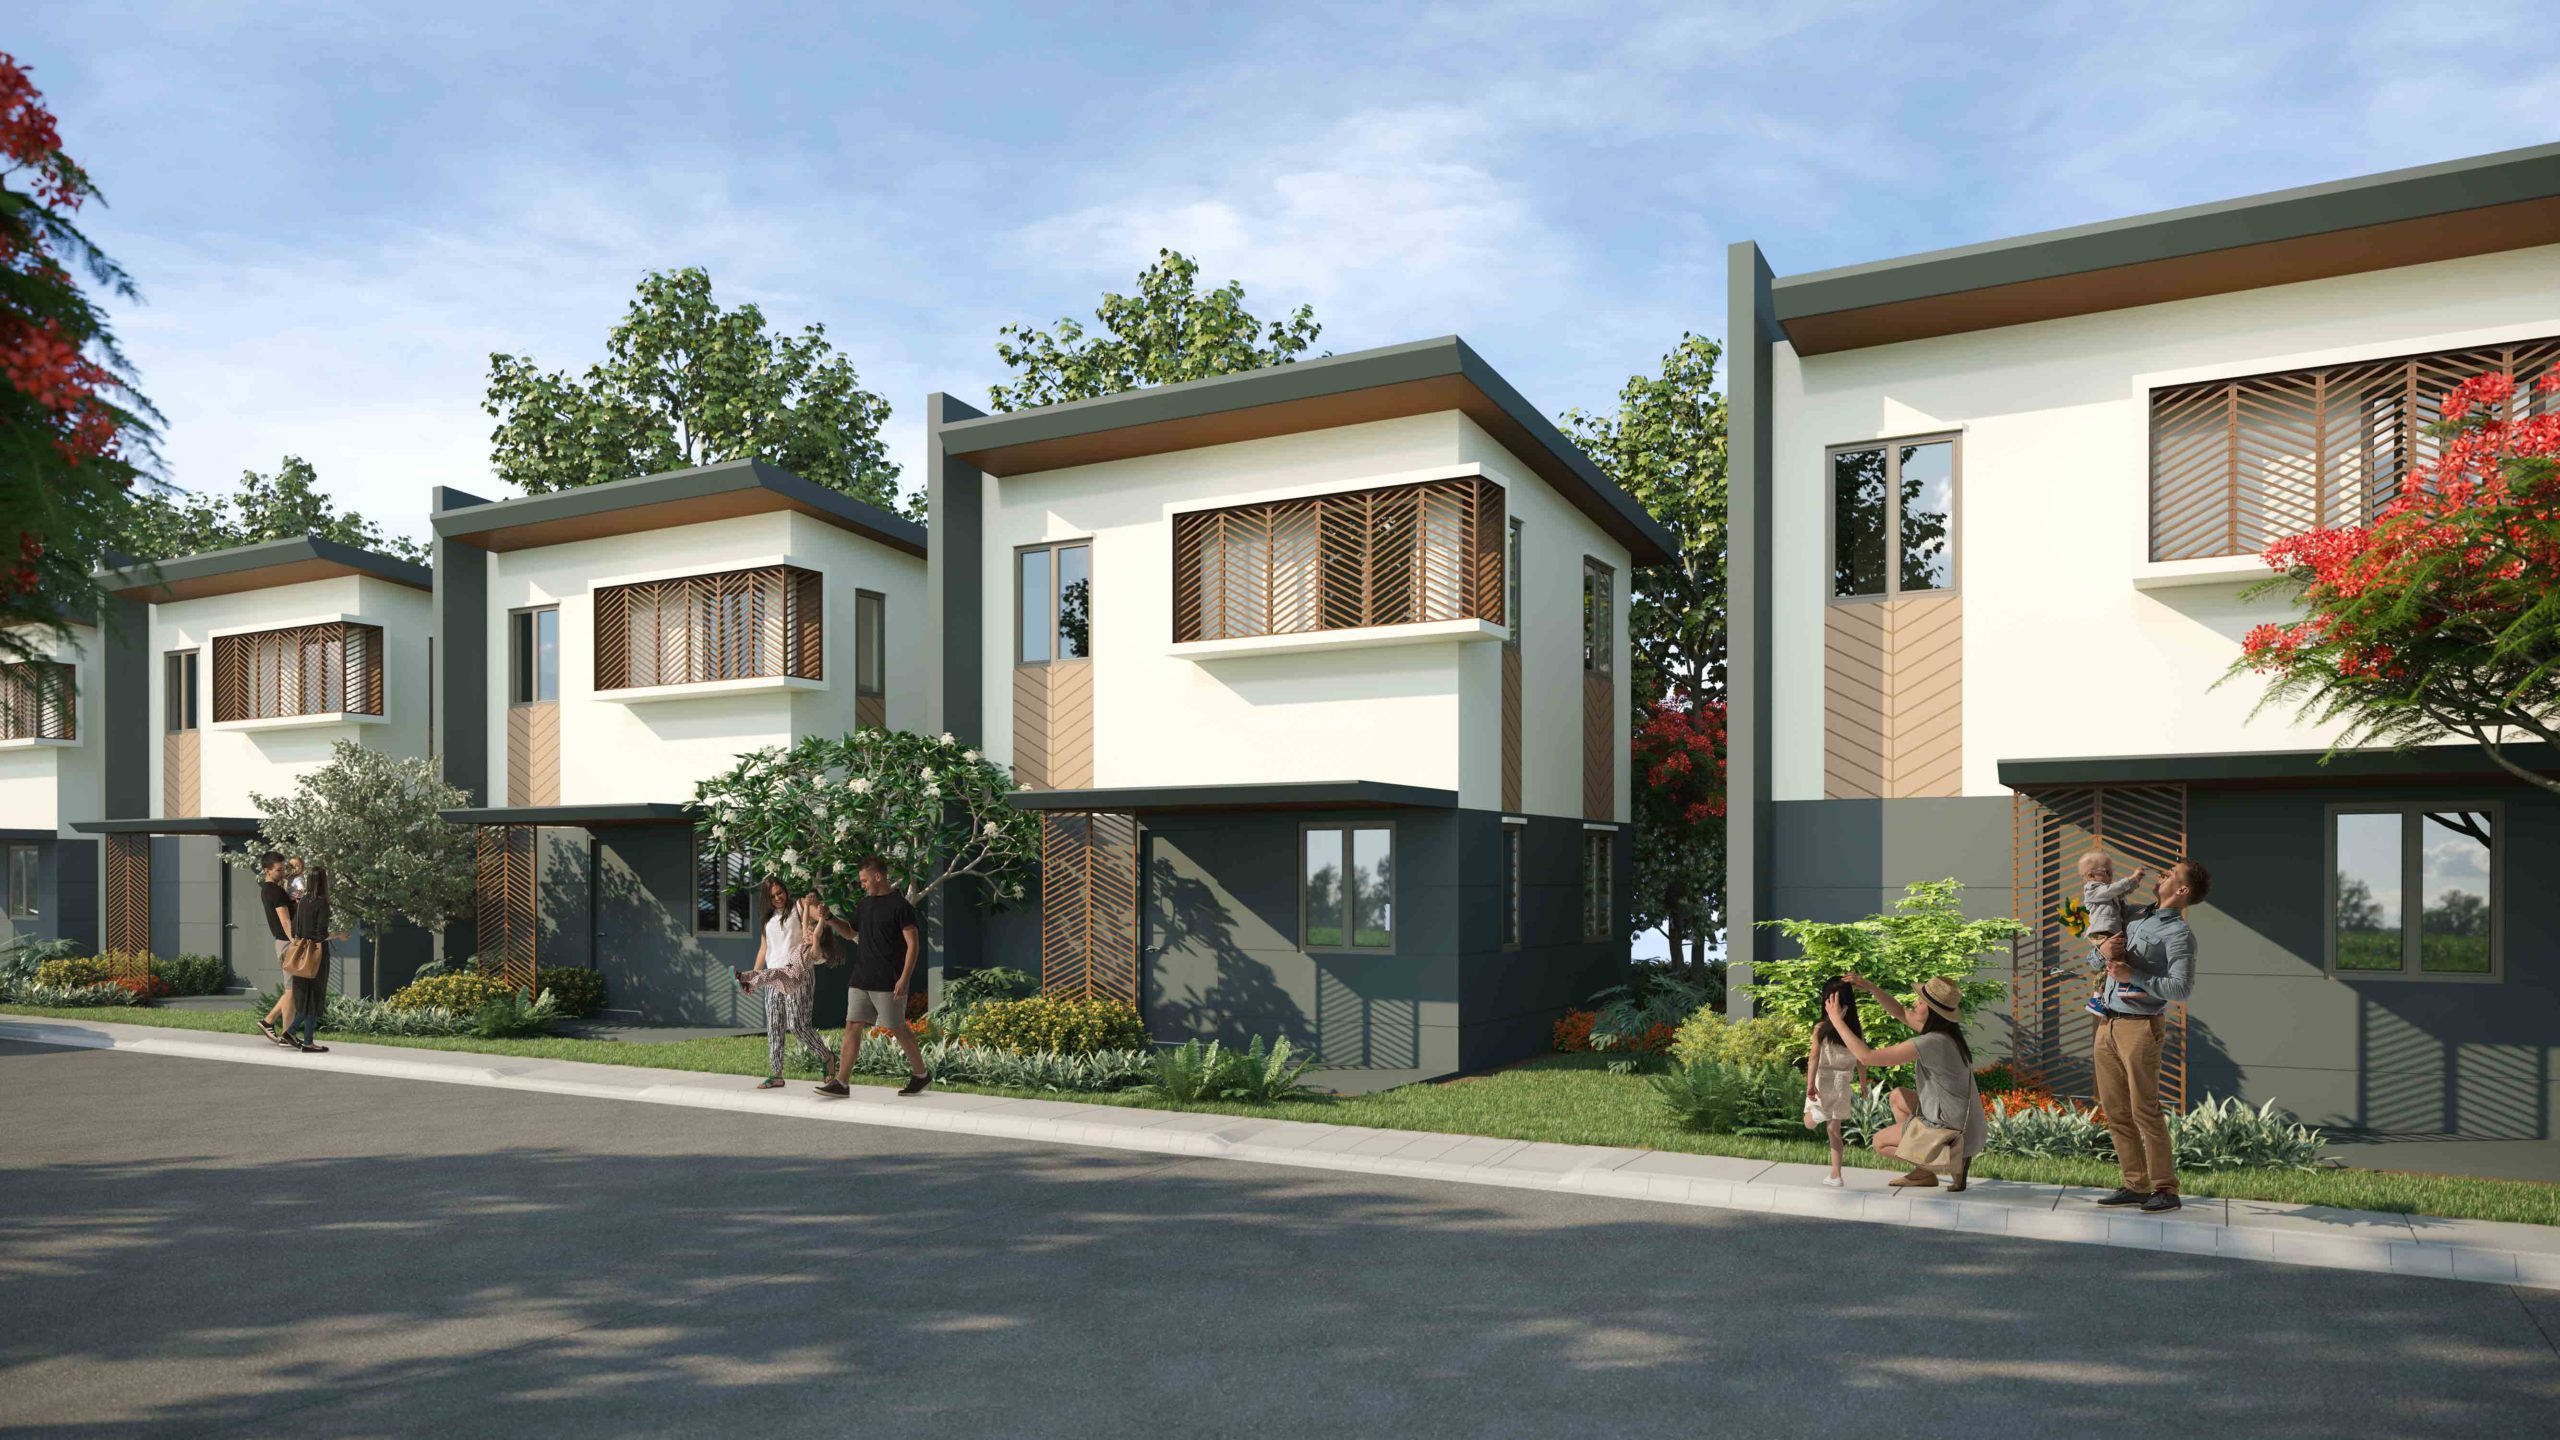 Aboitizland Properties: Quality Homes for All